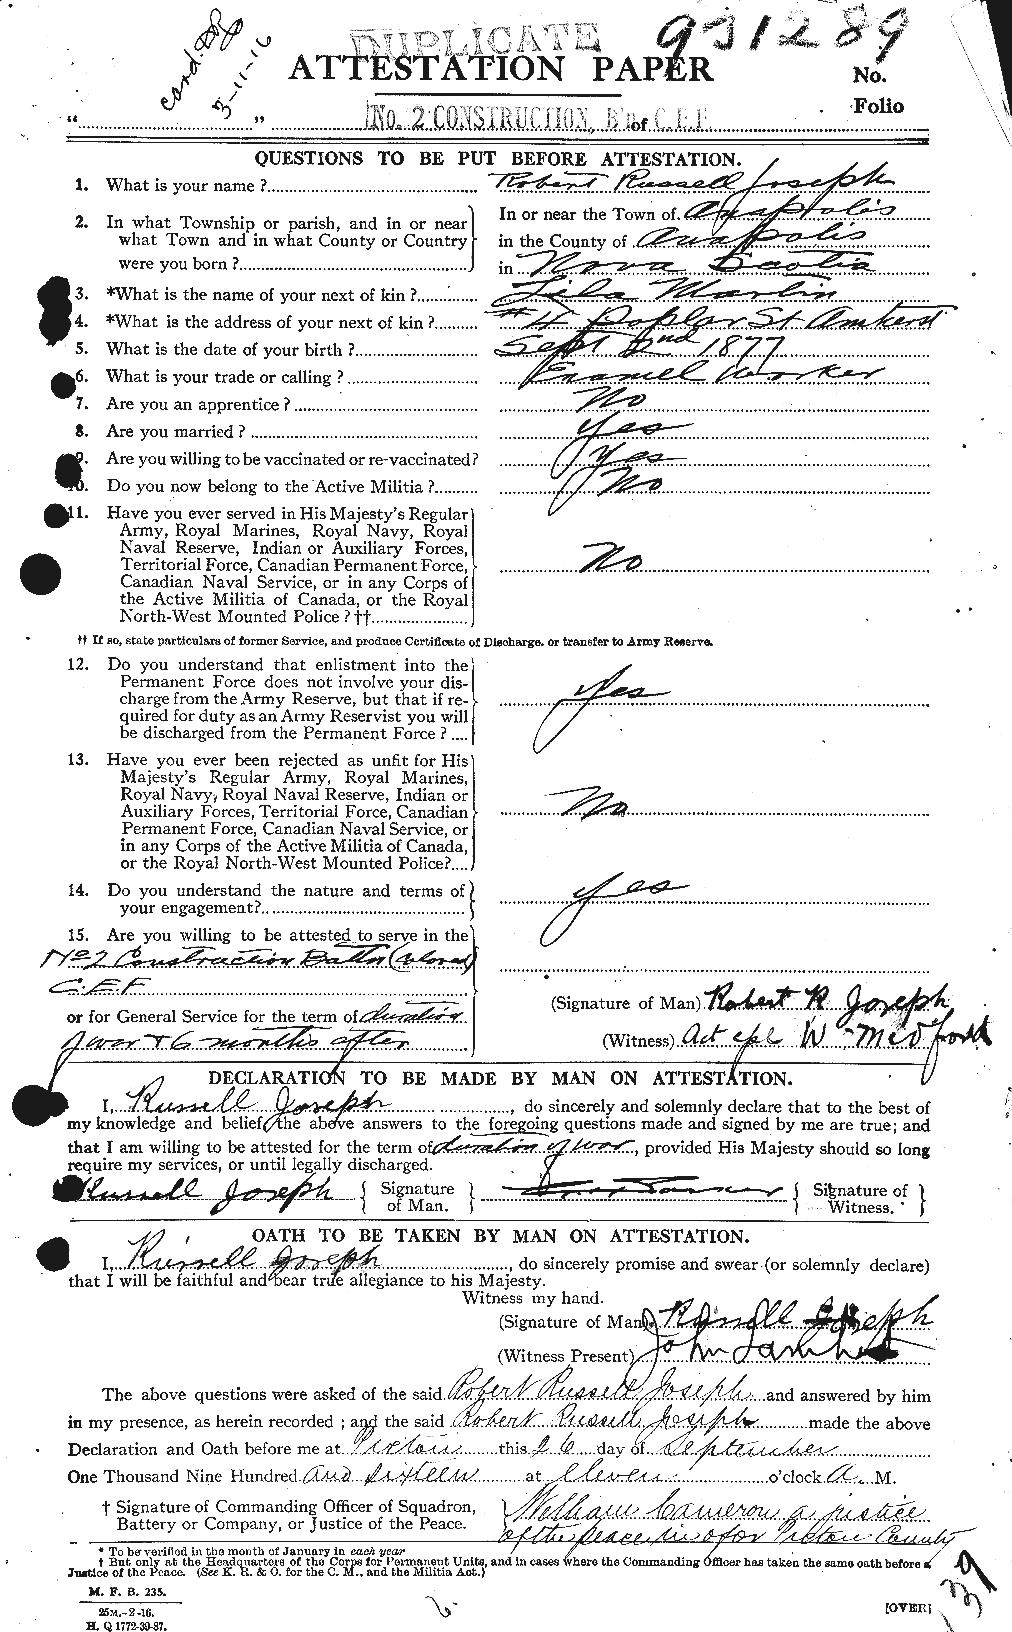 Personnel Records of the First World War - CEF 426128a